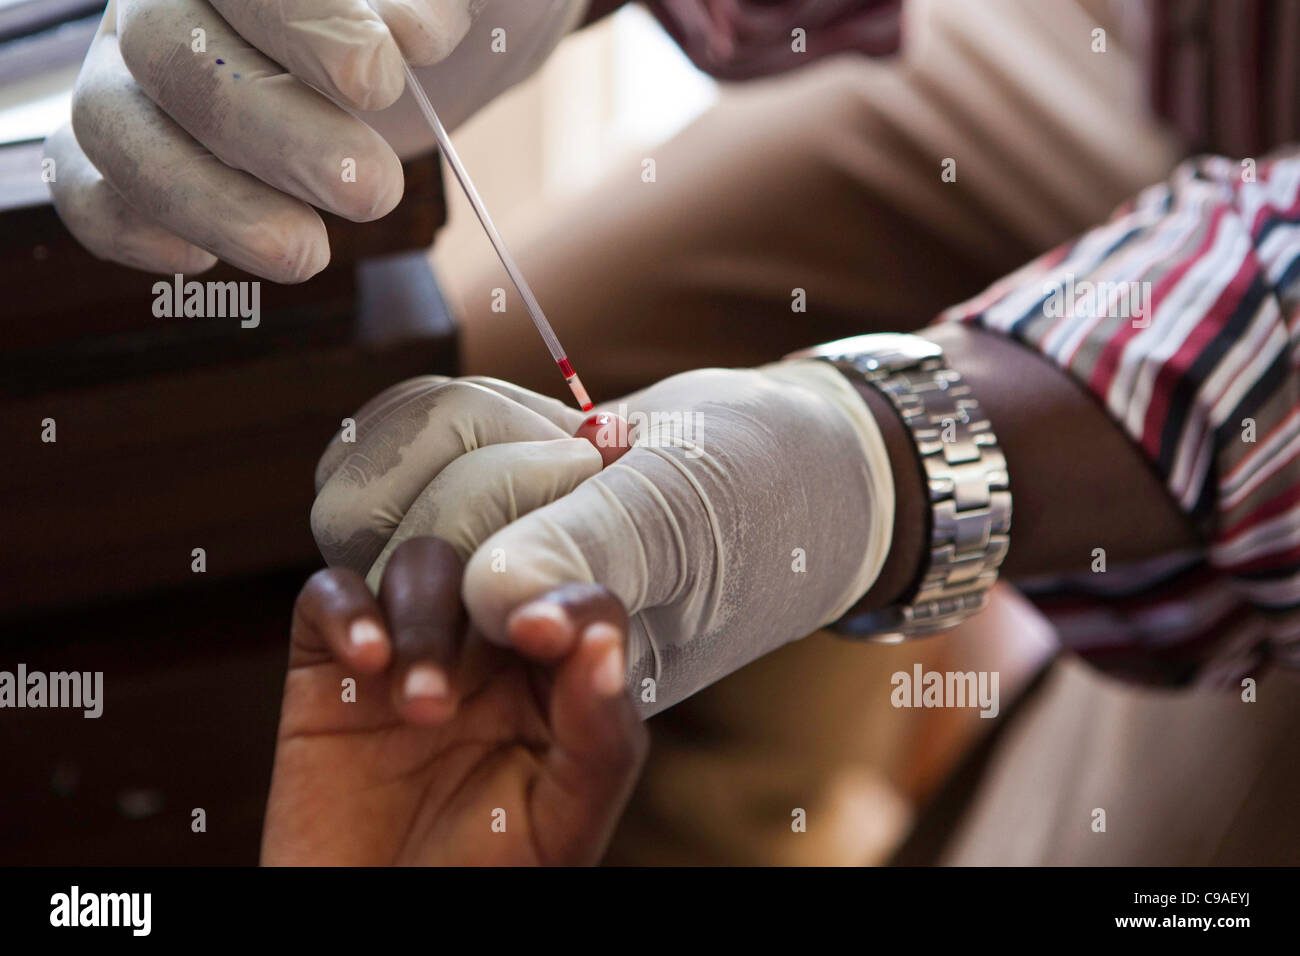 A blood test is being carried out at the Voluntary Testing Clinic at the Wema Centre in Mombasa, Kenya. Stock Photo